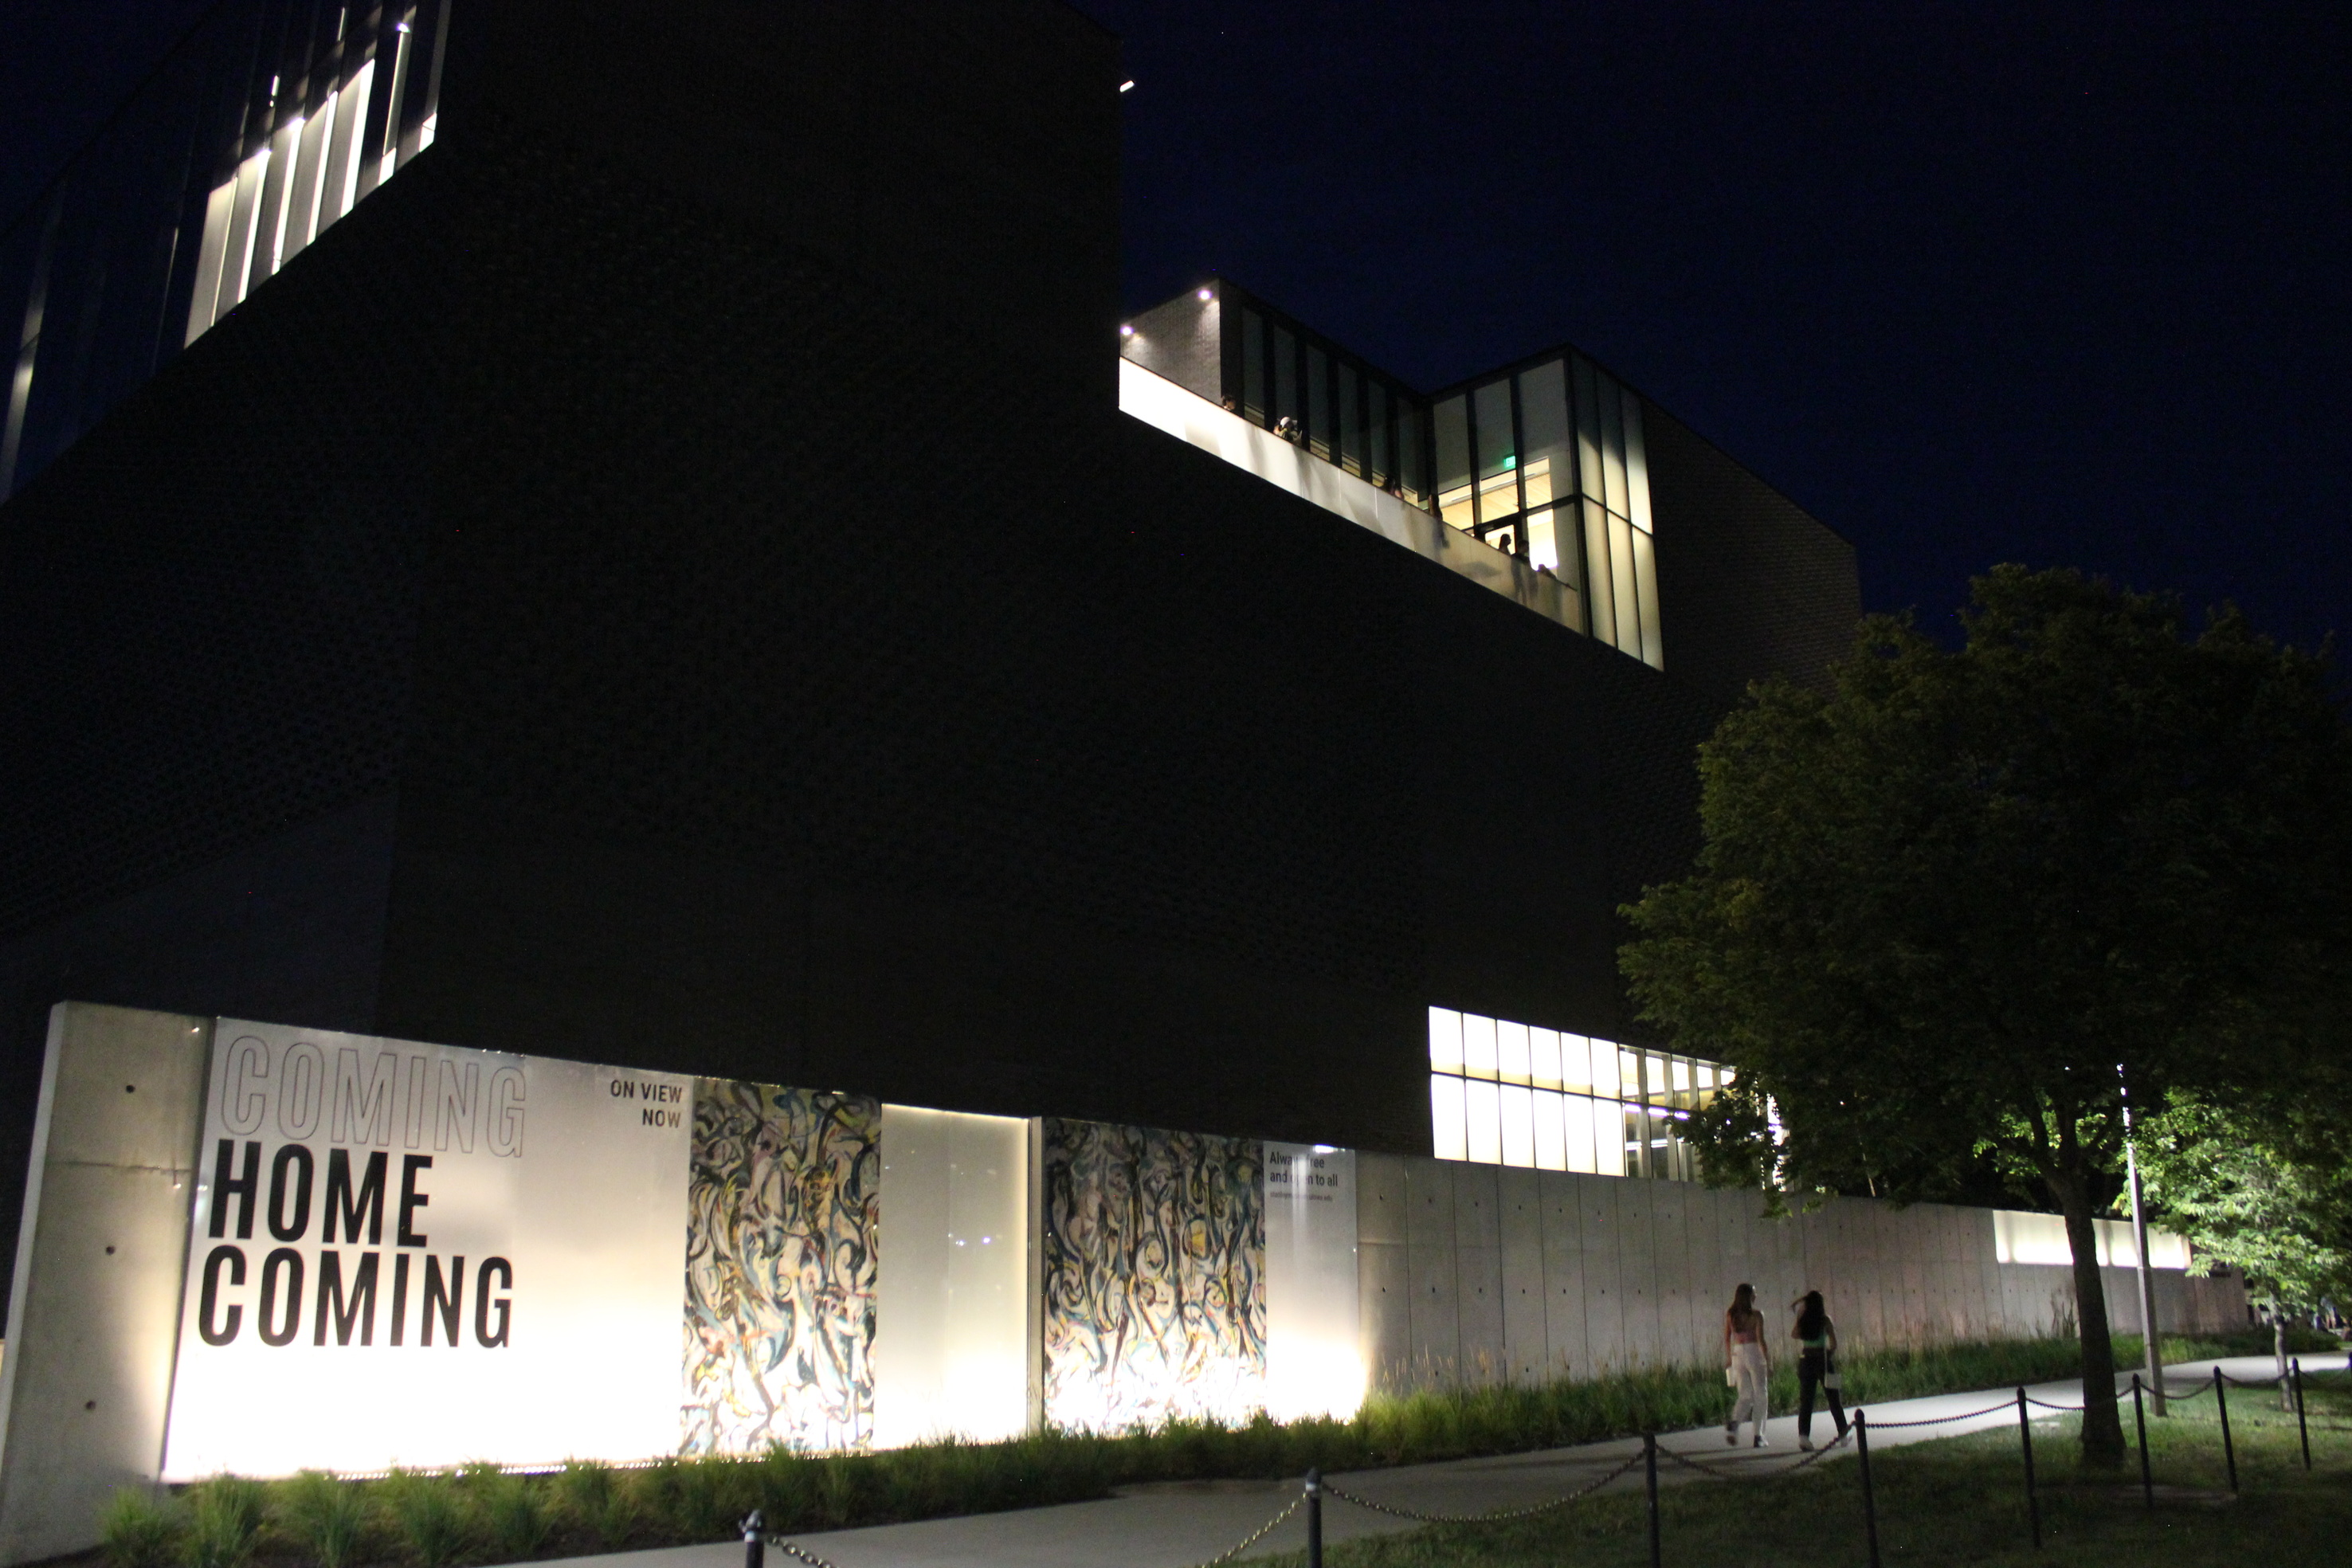 Exterior of museum building at night. A large sign with "Homecoming" is installed on a wall in the foreground and lit from below